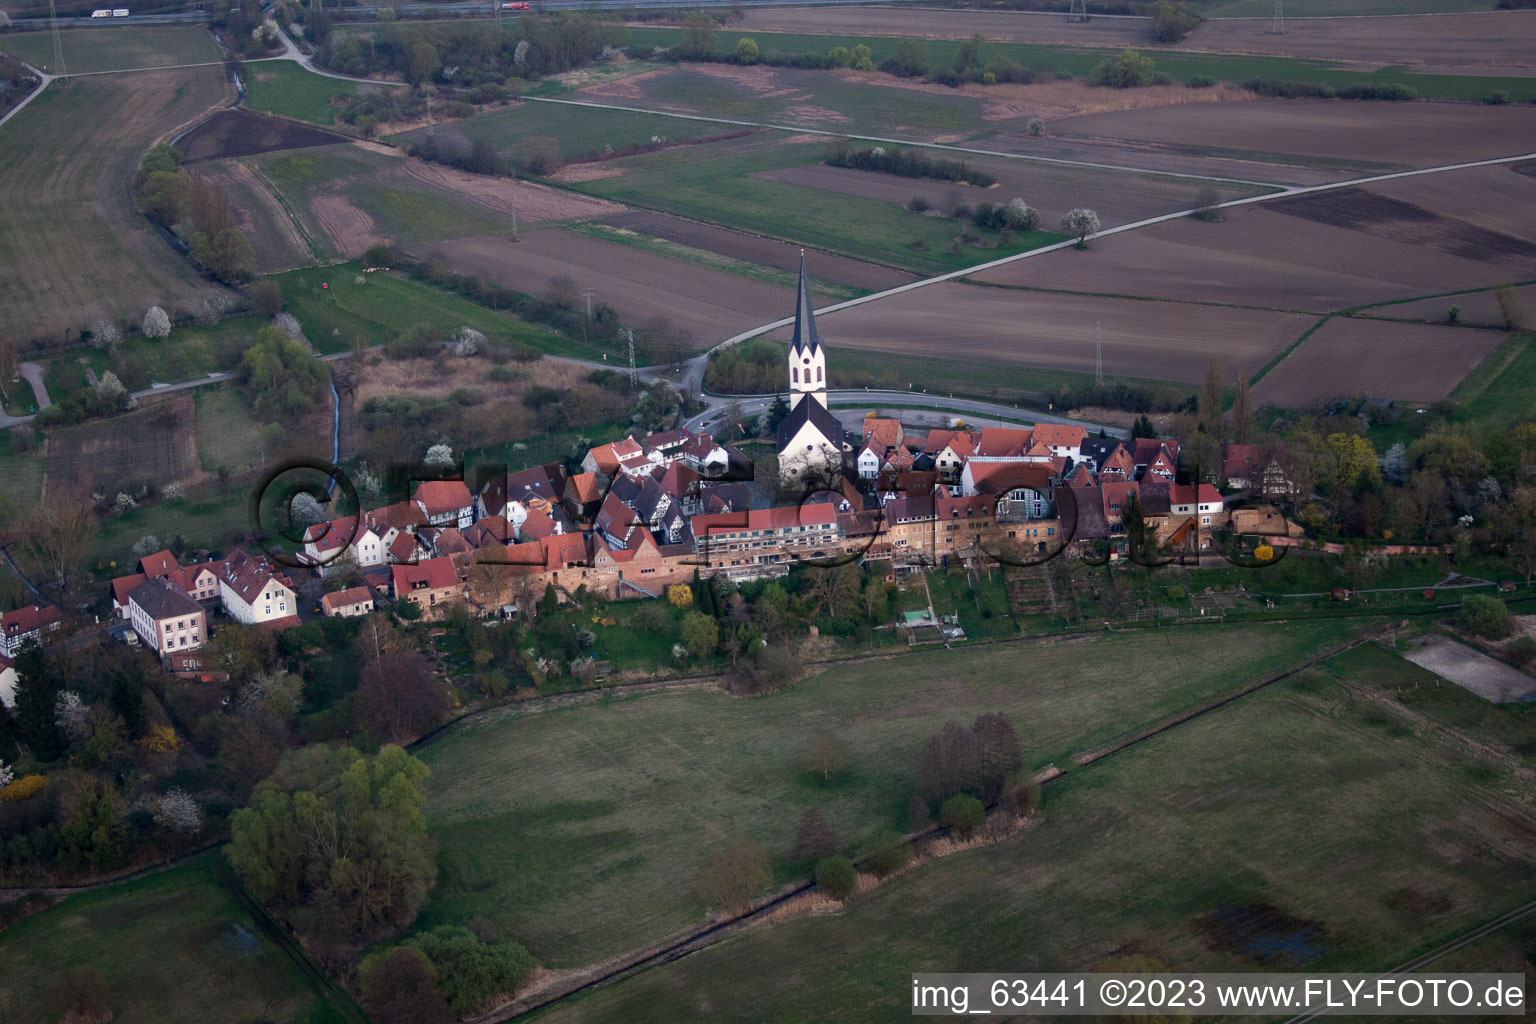 Aerial photograpy of Jockgrim in the state Rhineland-Palatinate, Germany